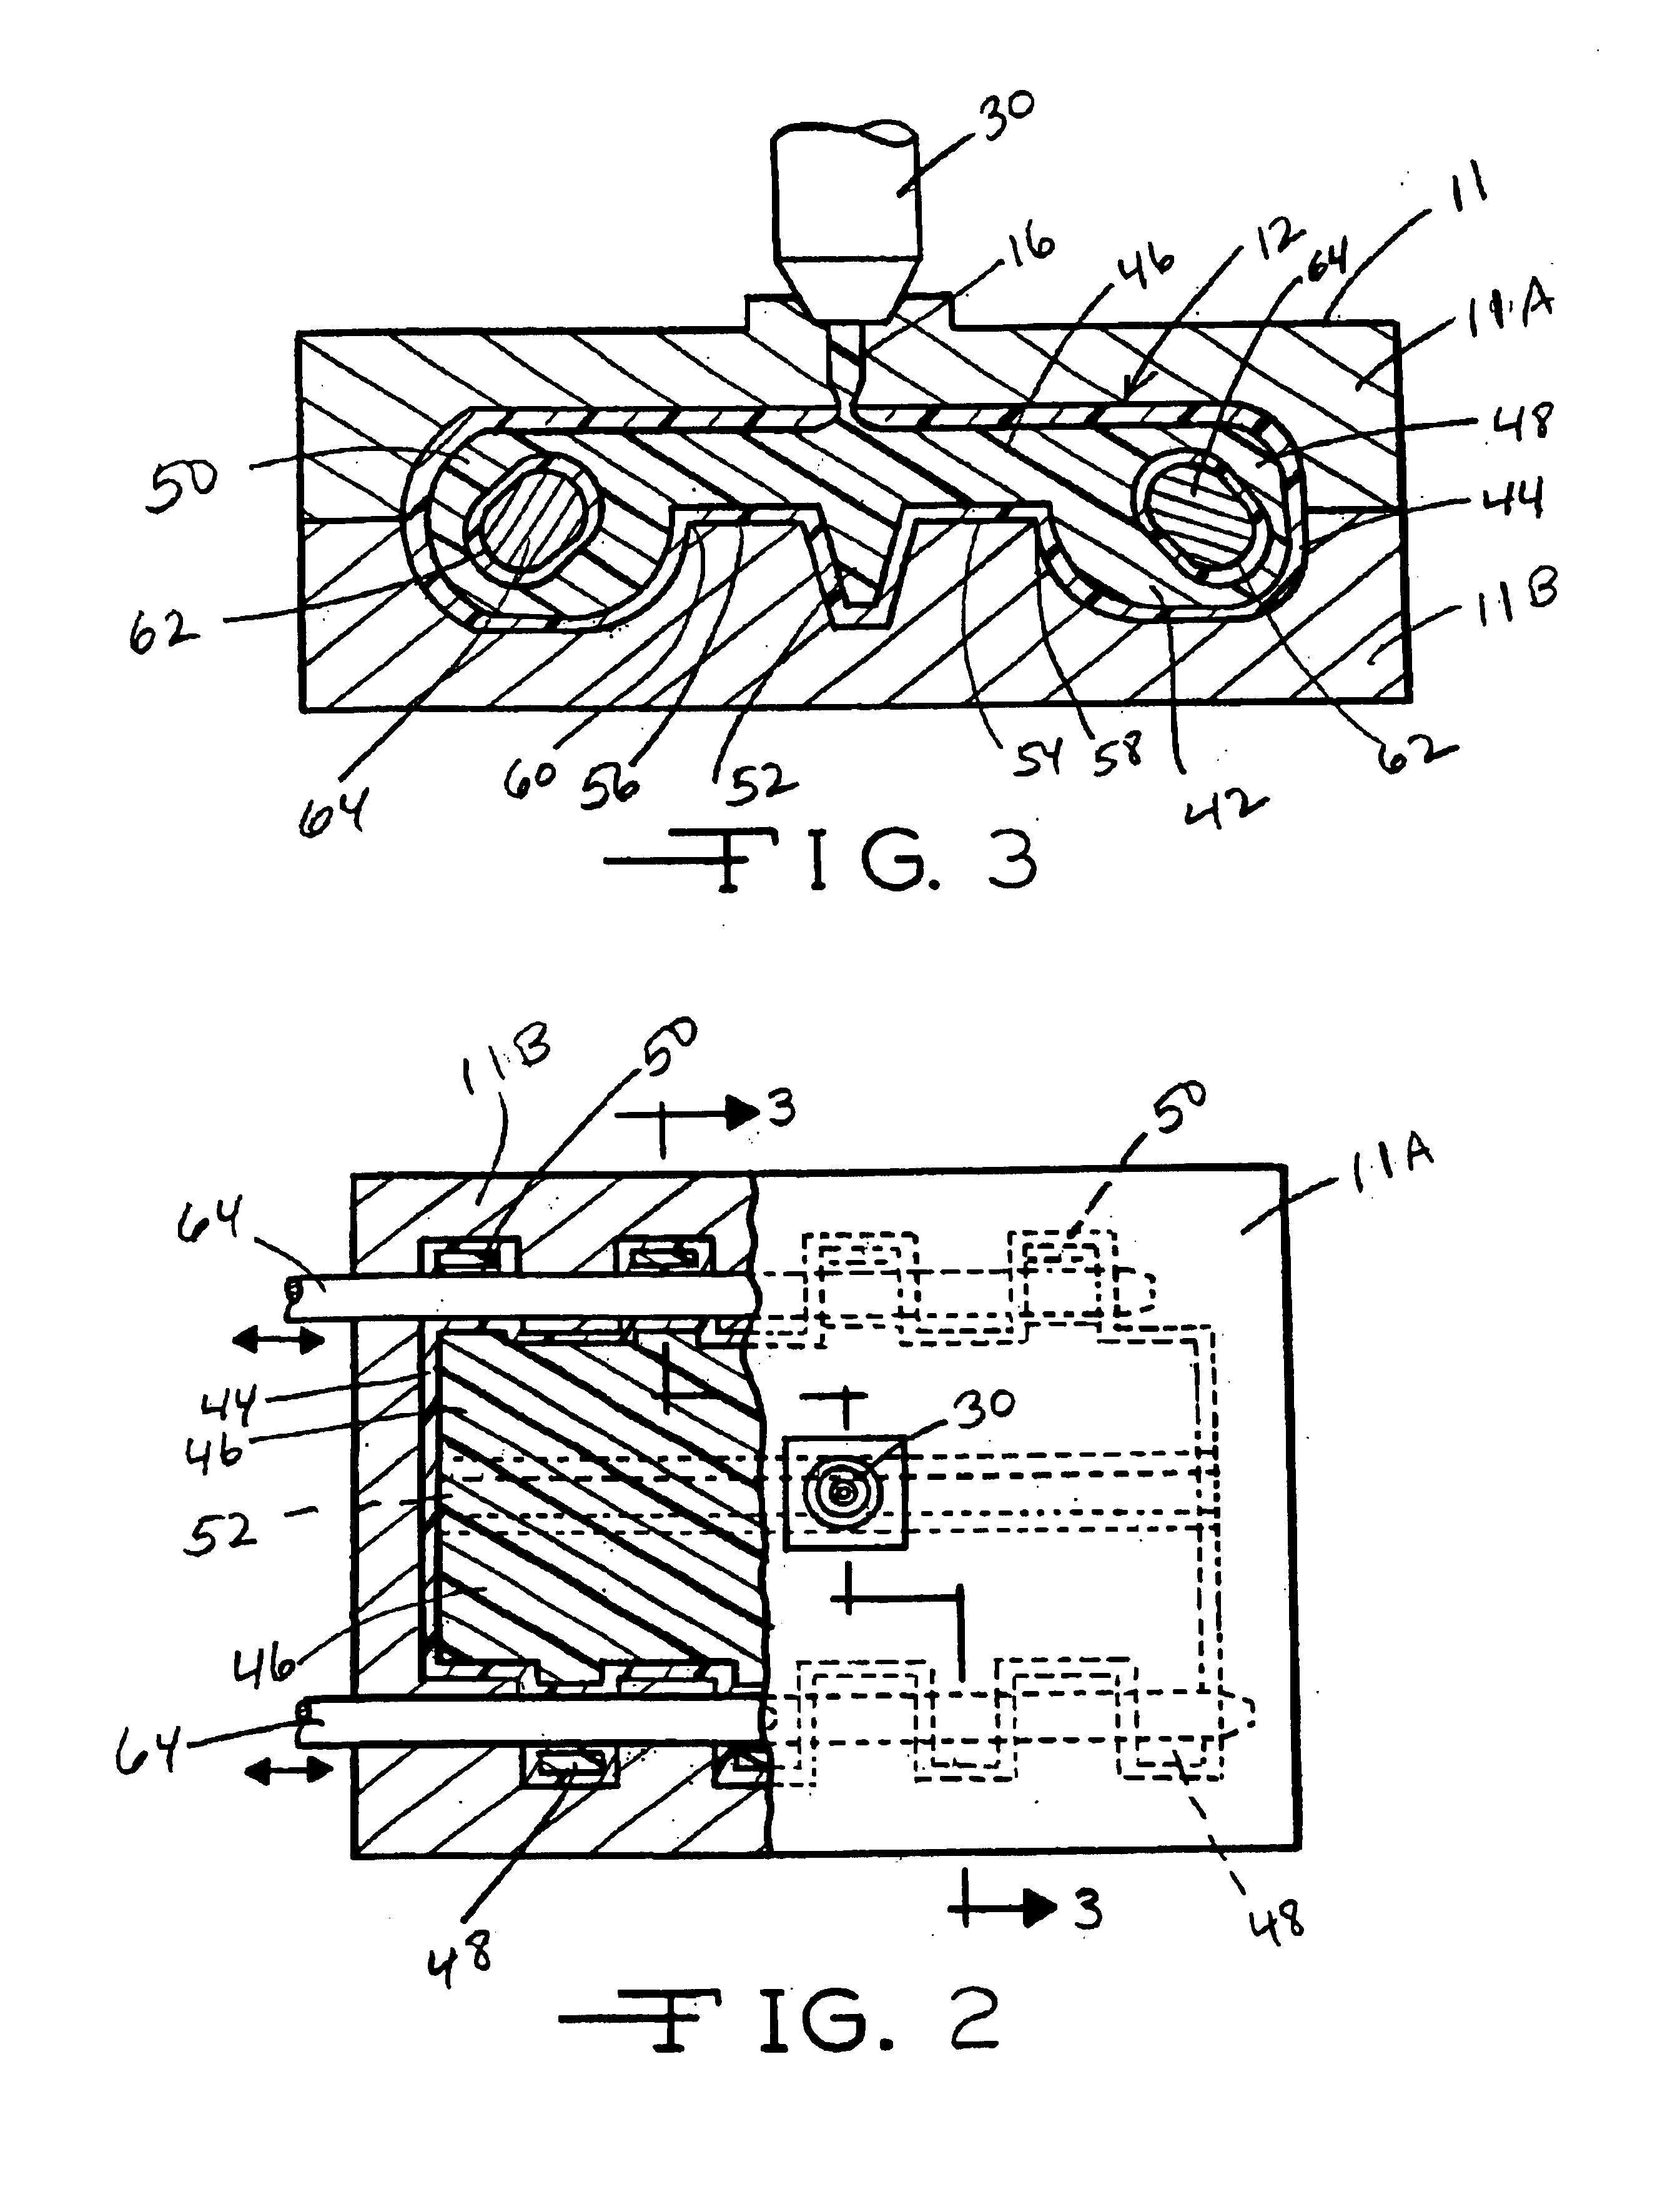 Module for a modular conveyor belt having a sandwich layer construction and method of manufacture